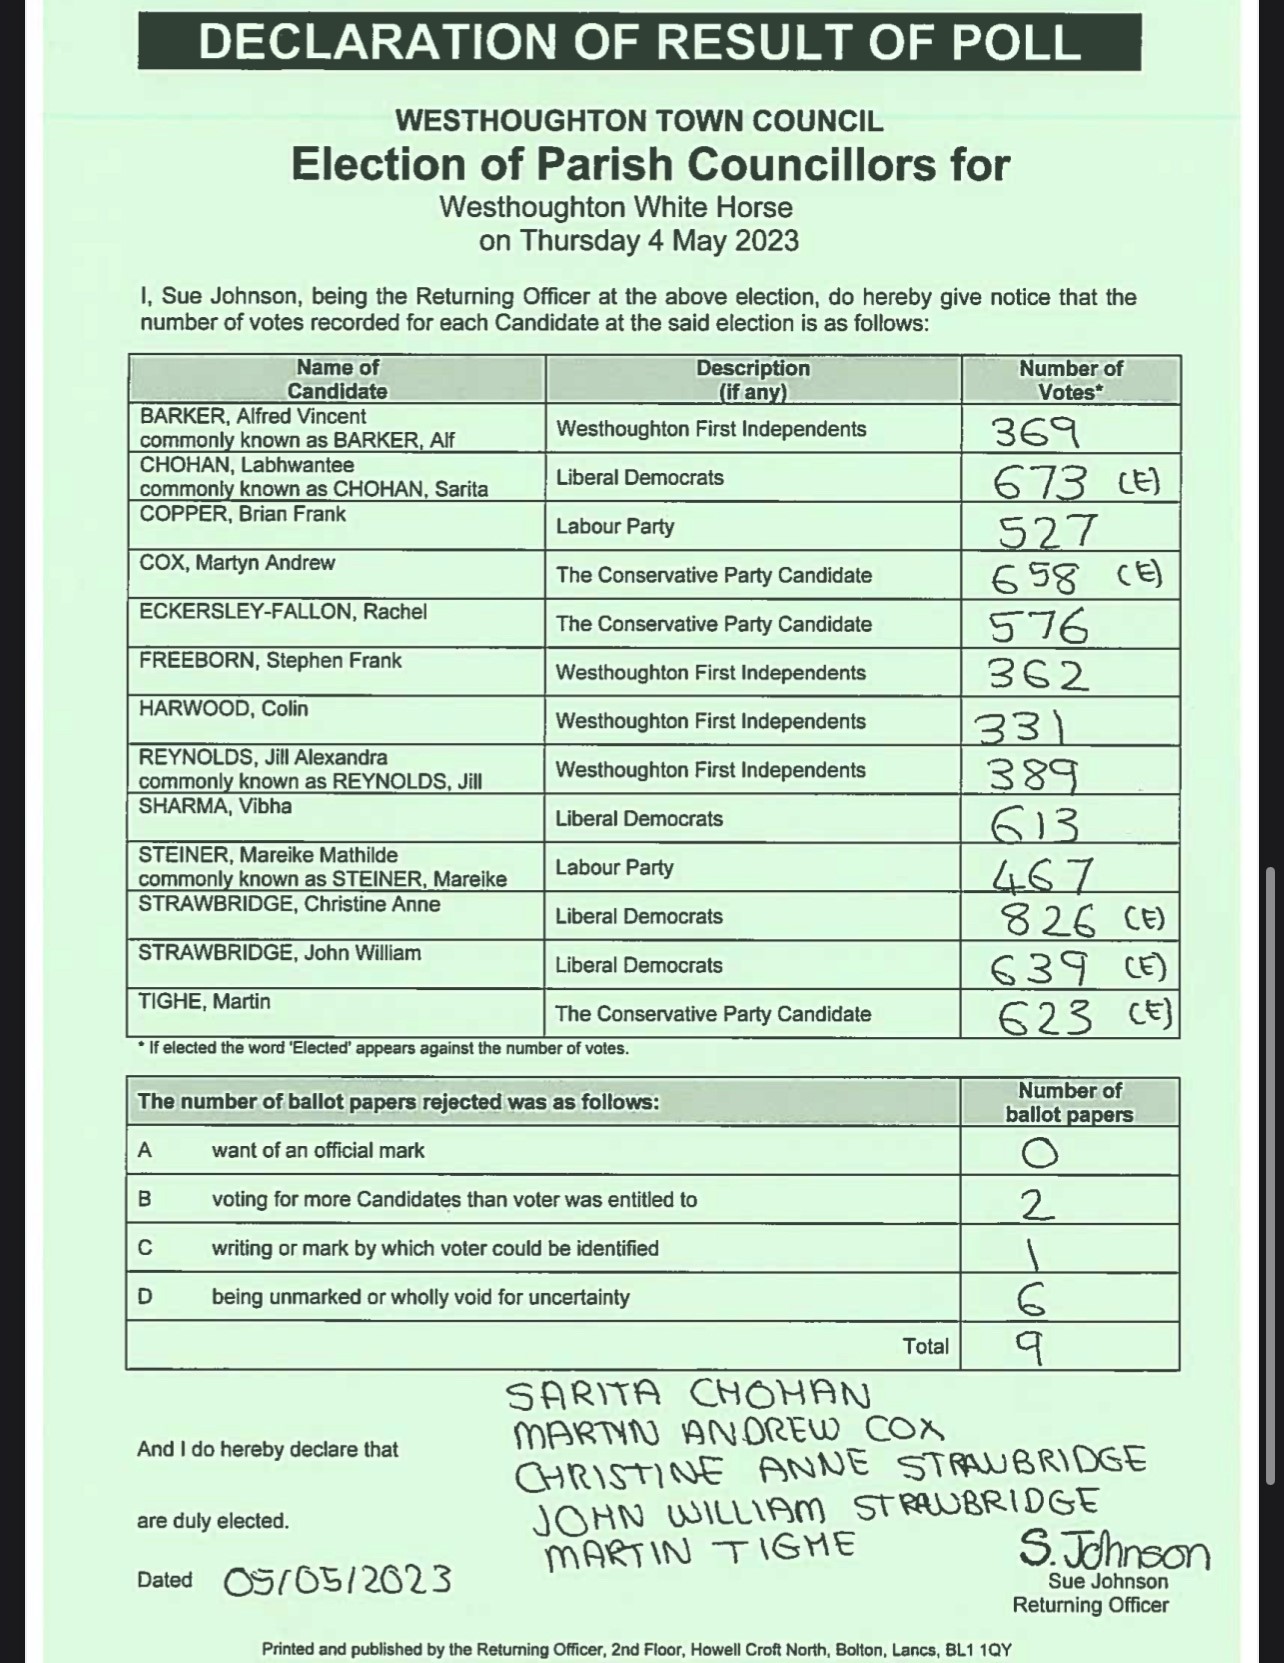 Westhoughton White Horse results